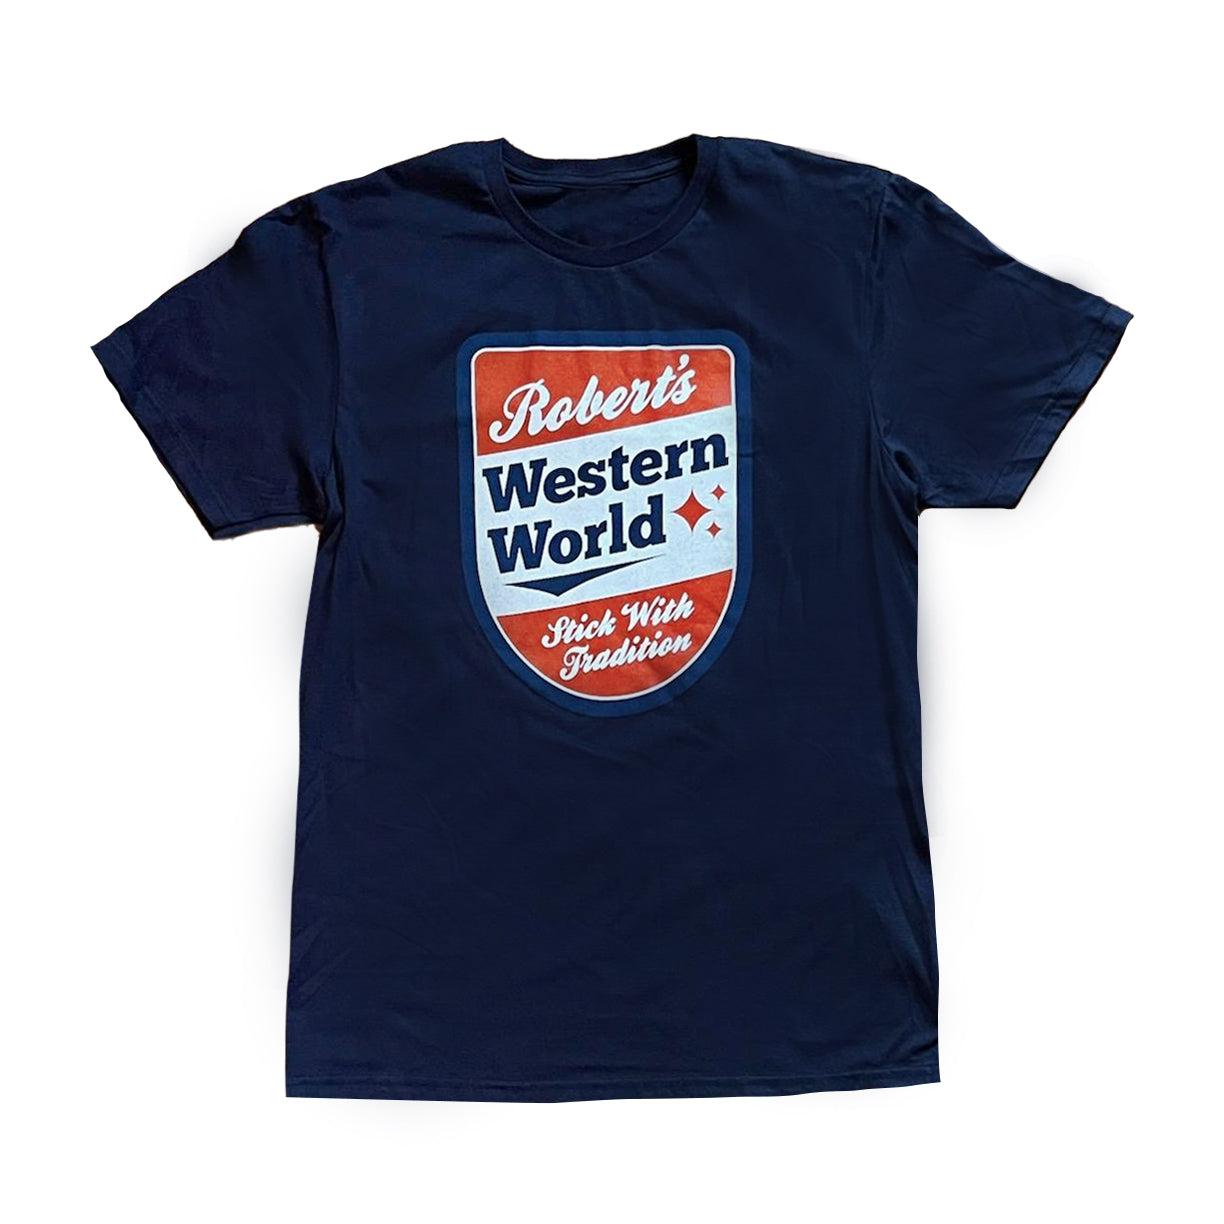 Stick With Tradition Tee -Navy